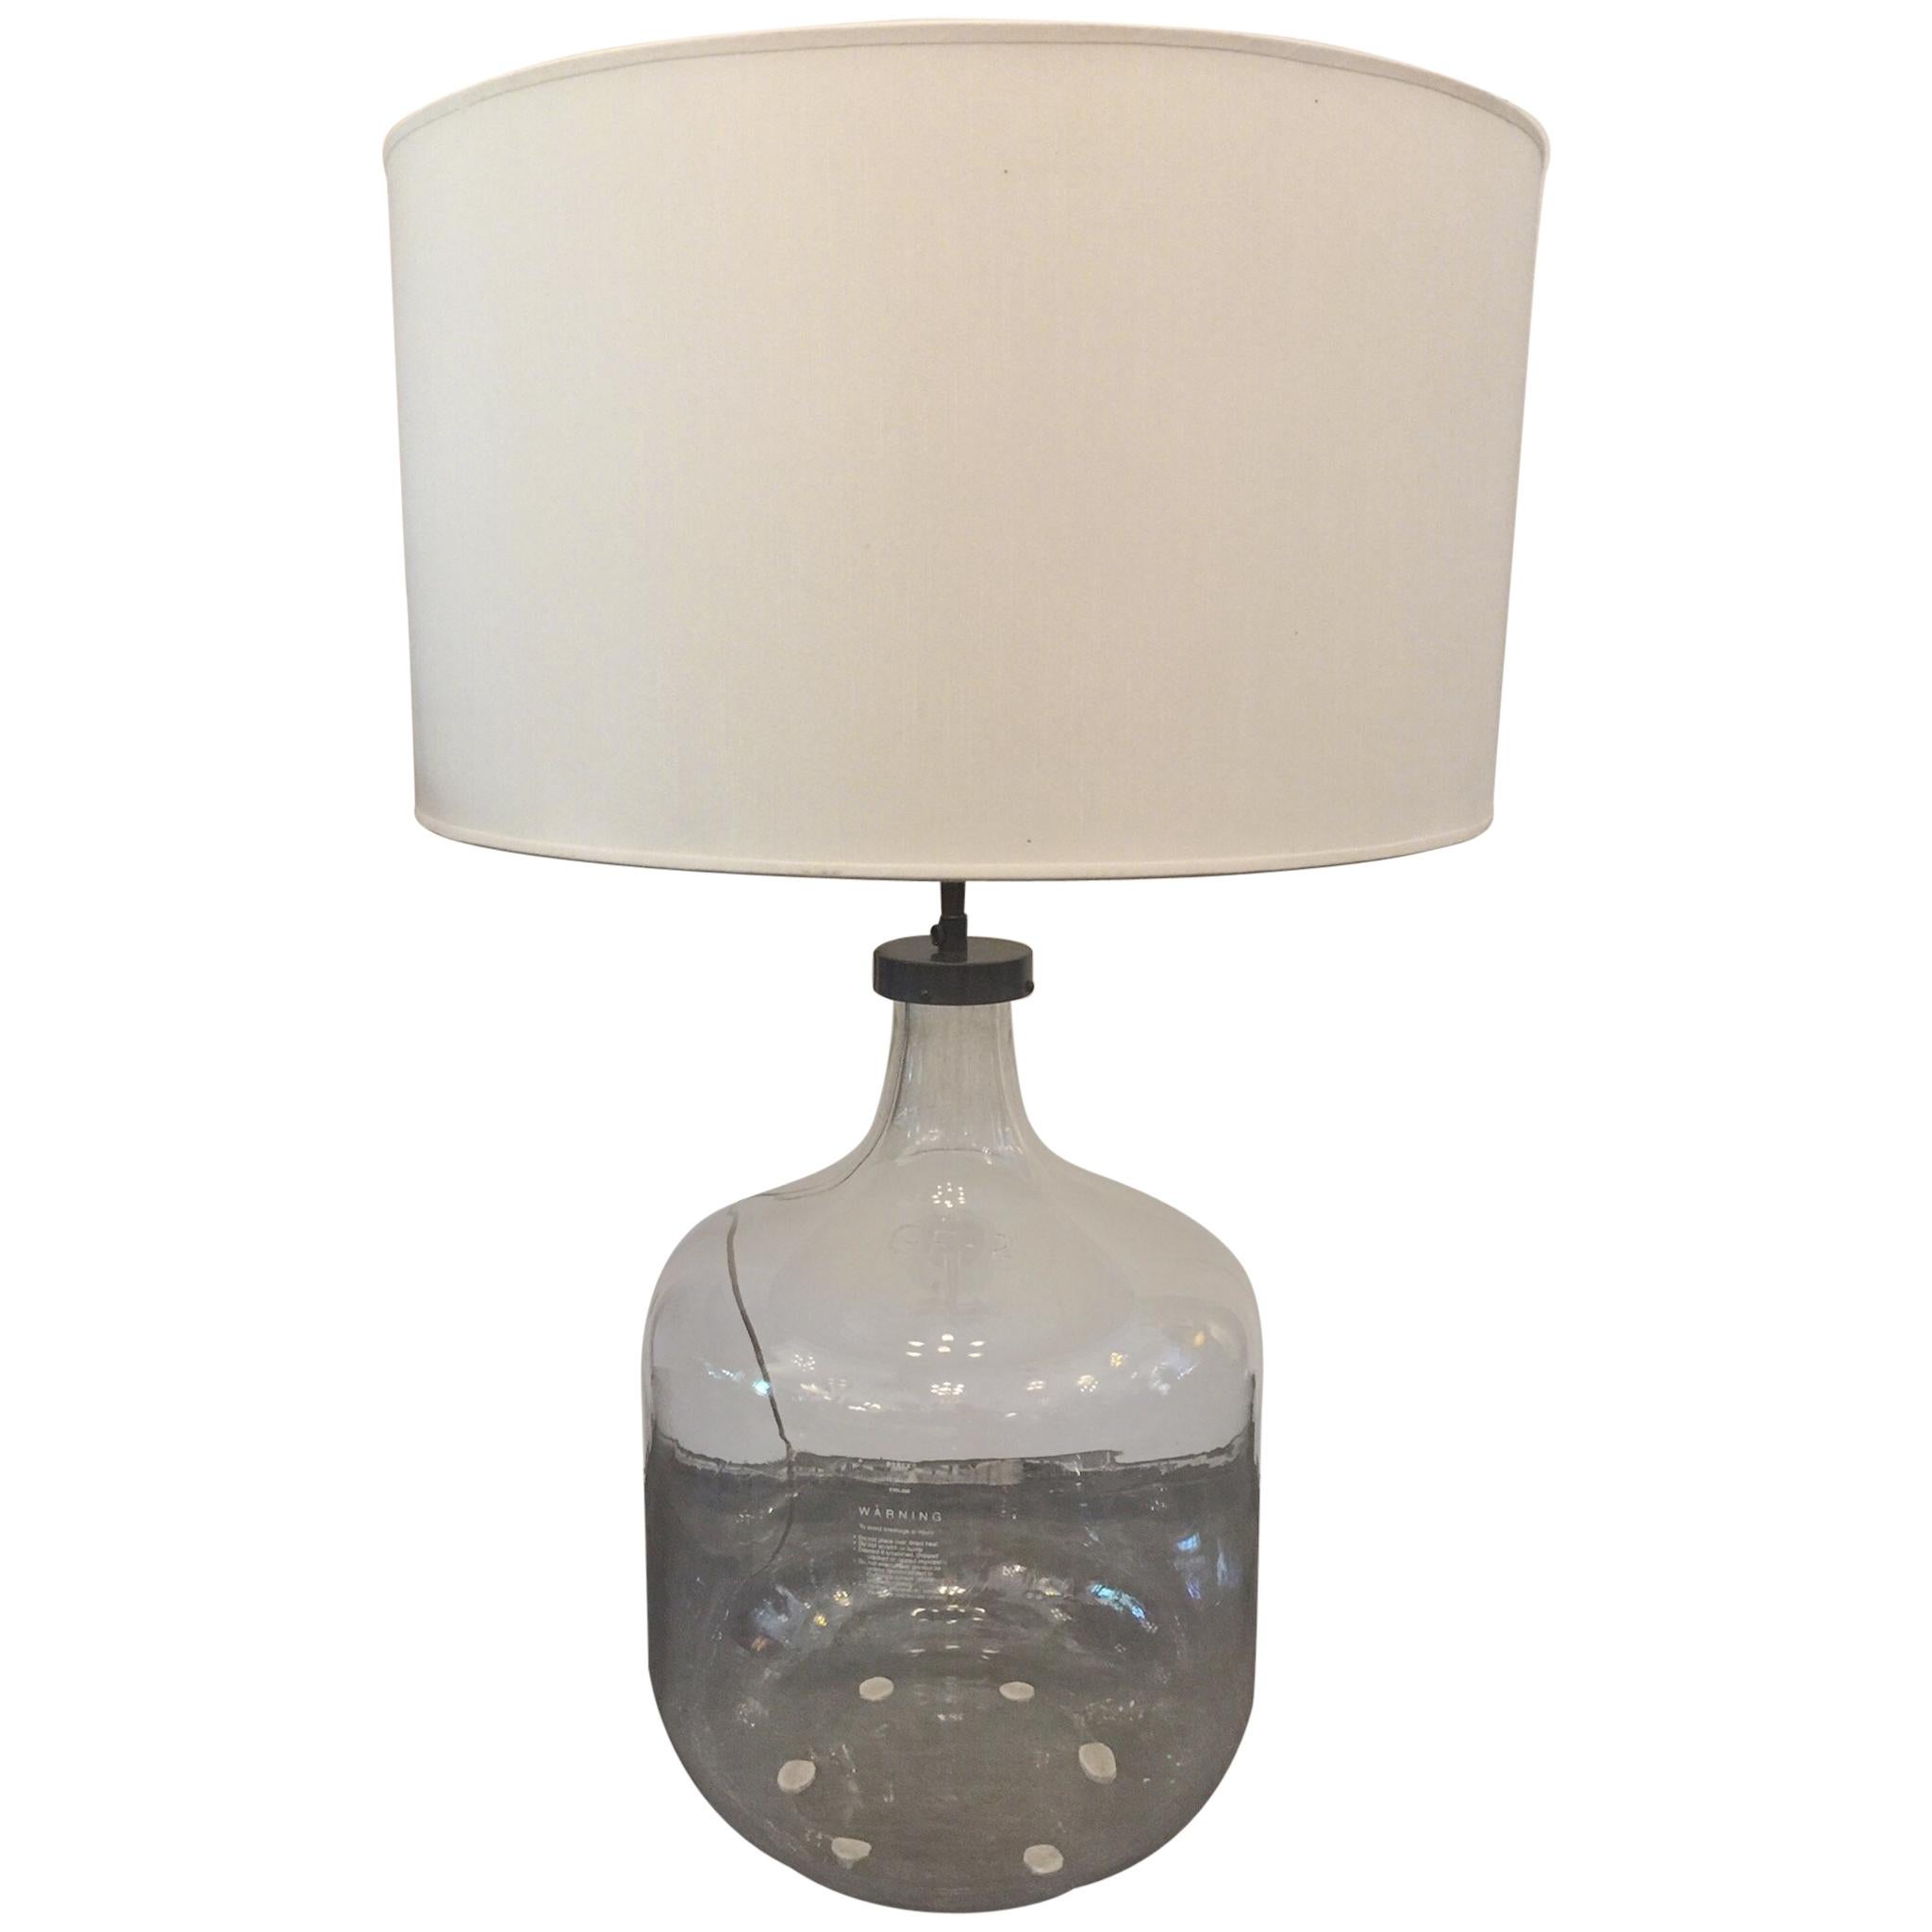 Super-Oversized Pyrex Laboratory Bottle Table Lamp For Sale